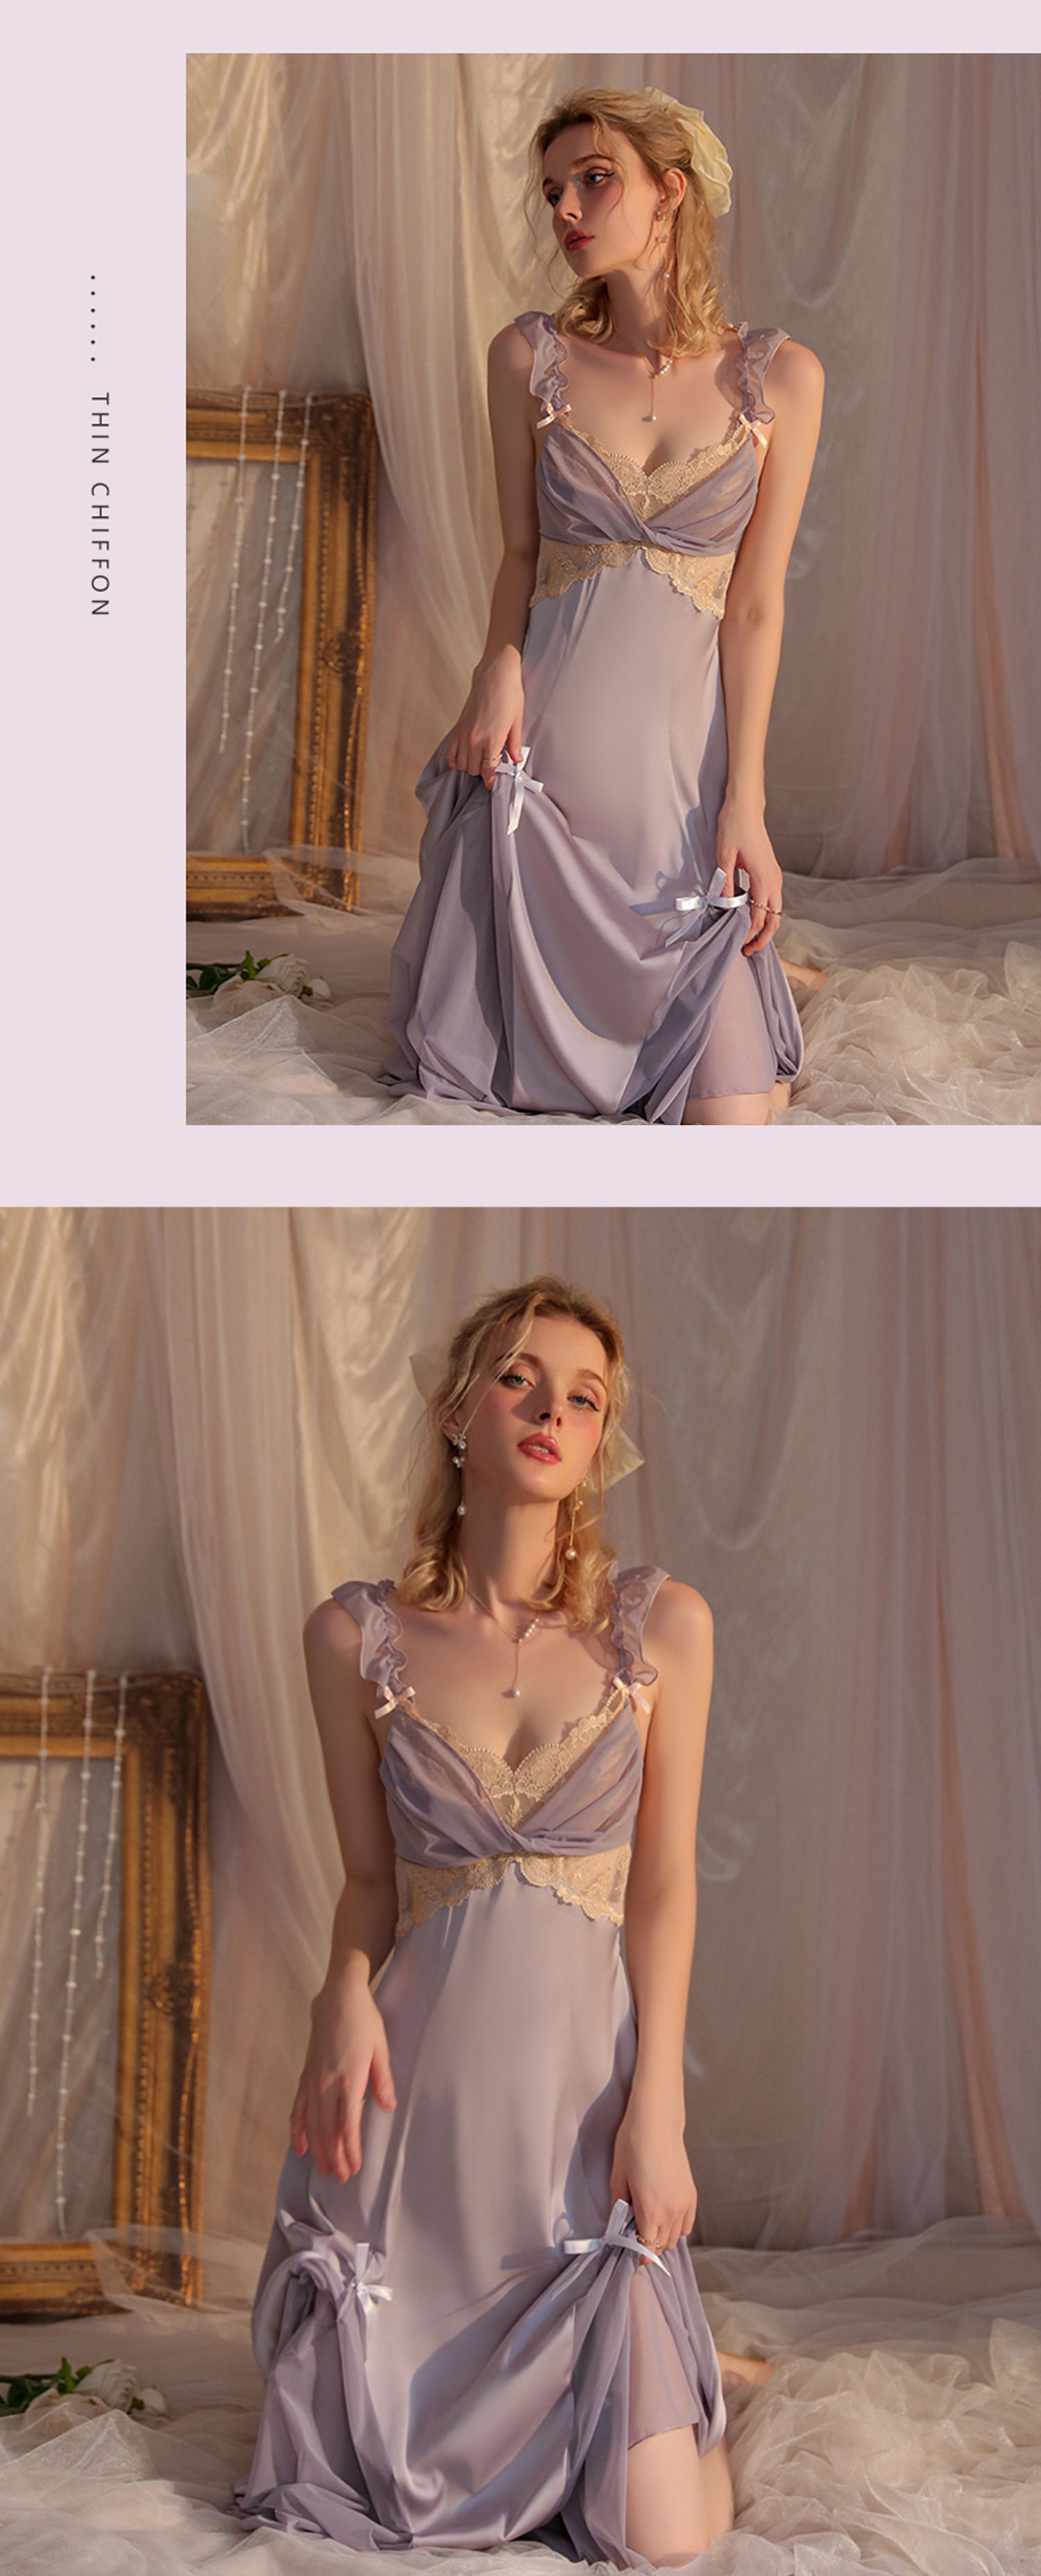 Sexy-See-Through-Lingerie-Purple-Lace-Long-Nightgown-Chemise11.jpg